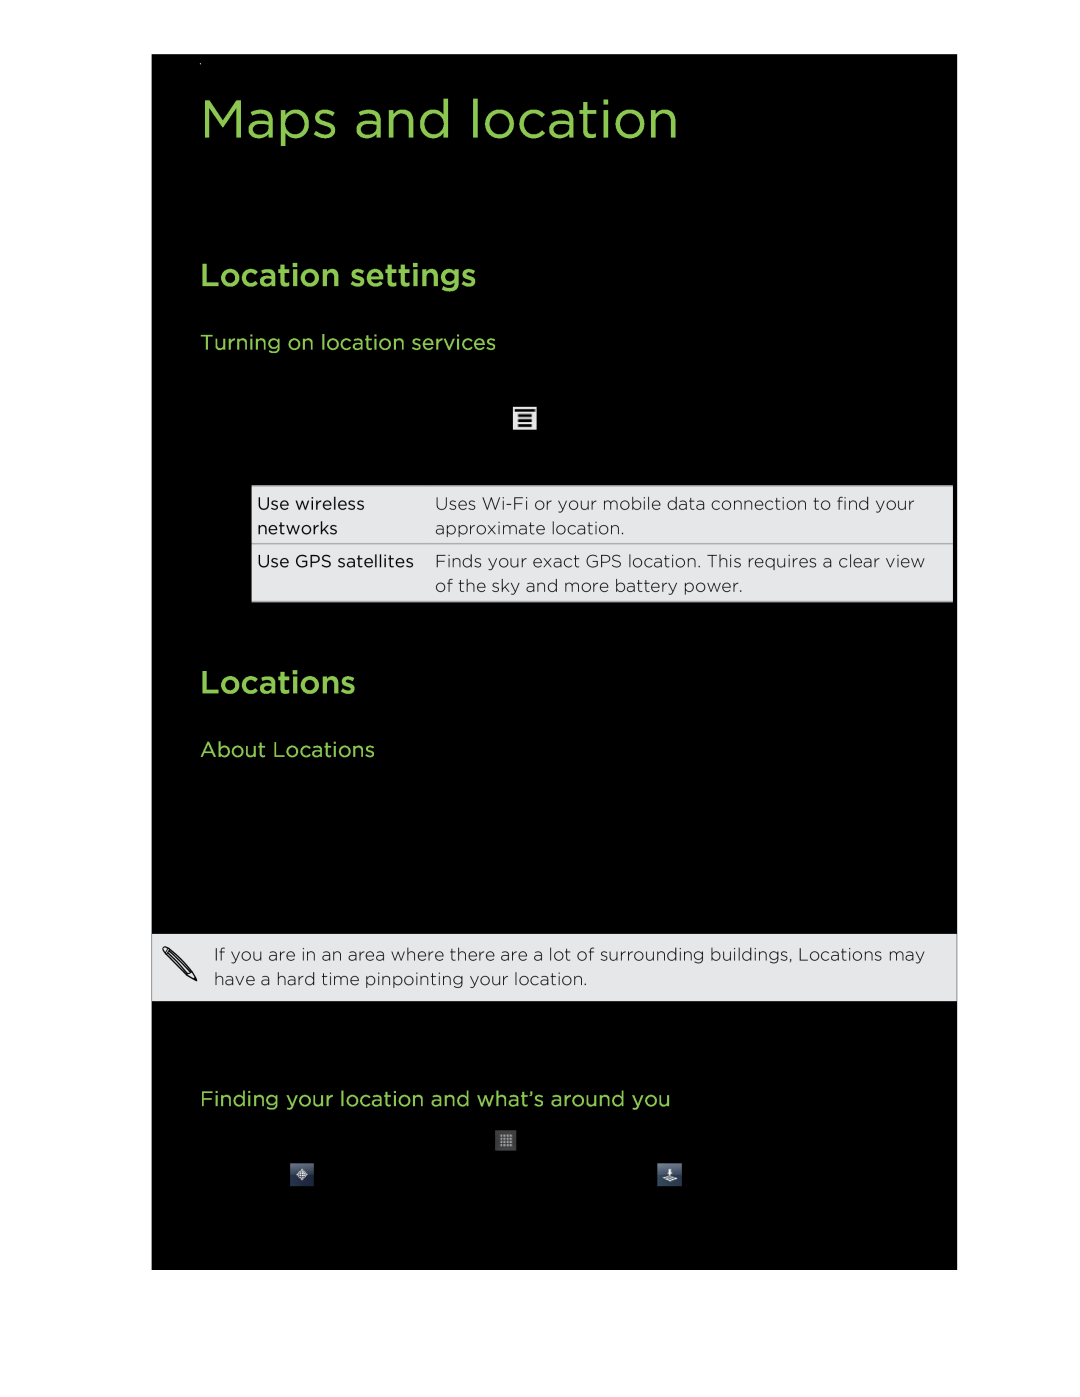 HTC HTCFlyerP512 manual Maps and location, Location settings, Turning on location services, About Locations 